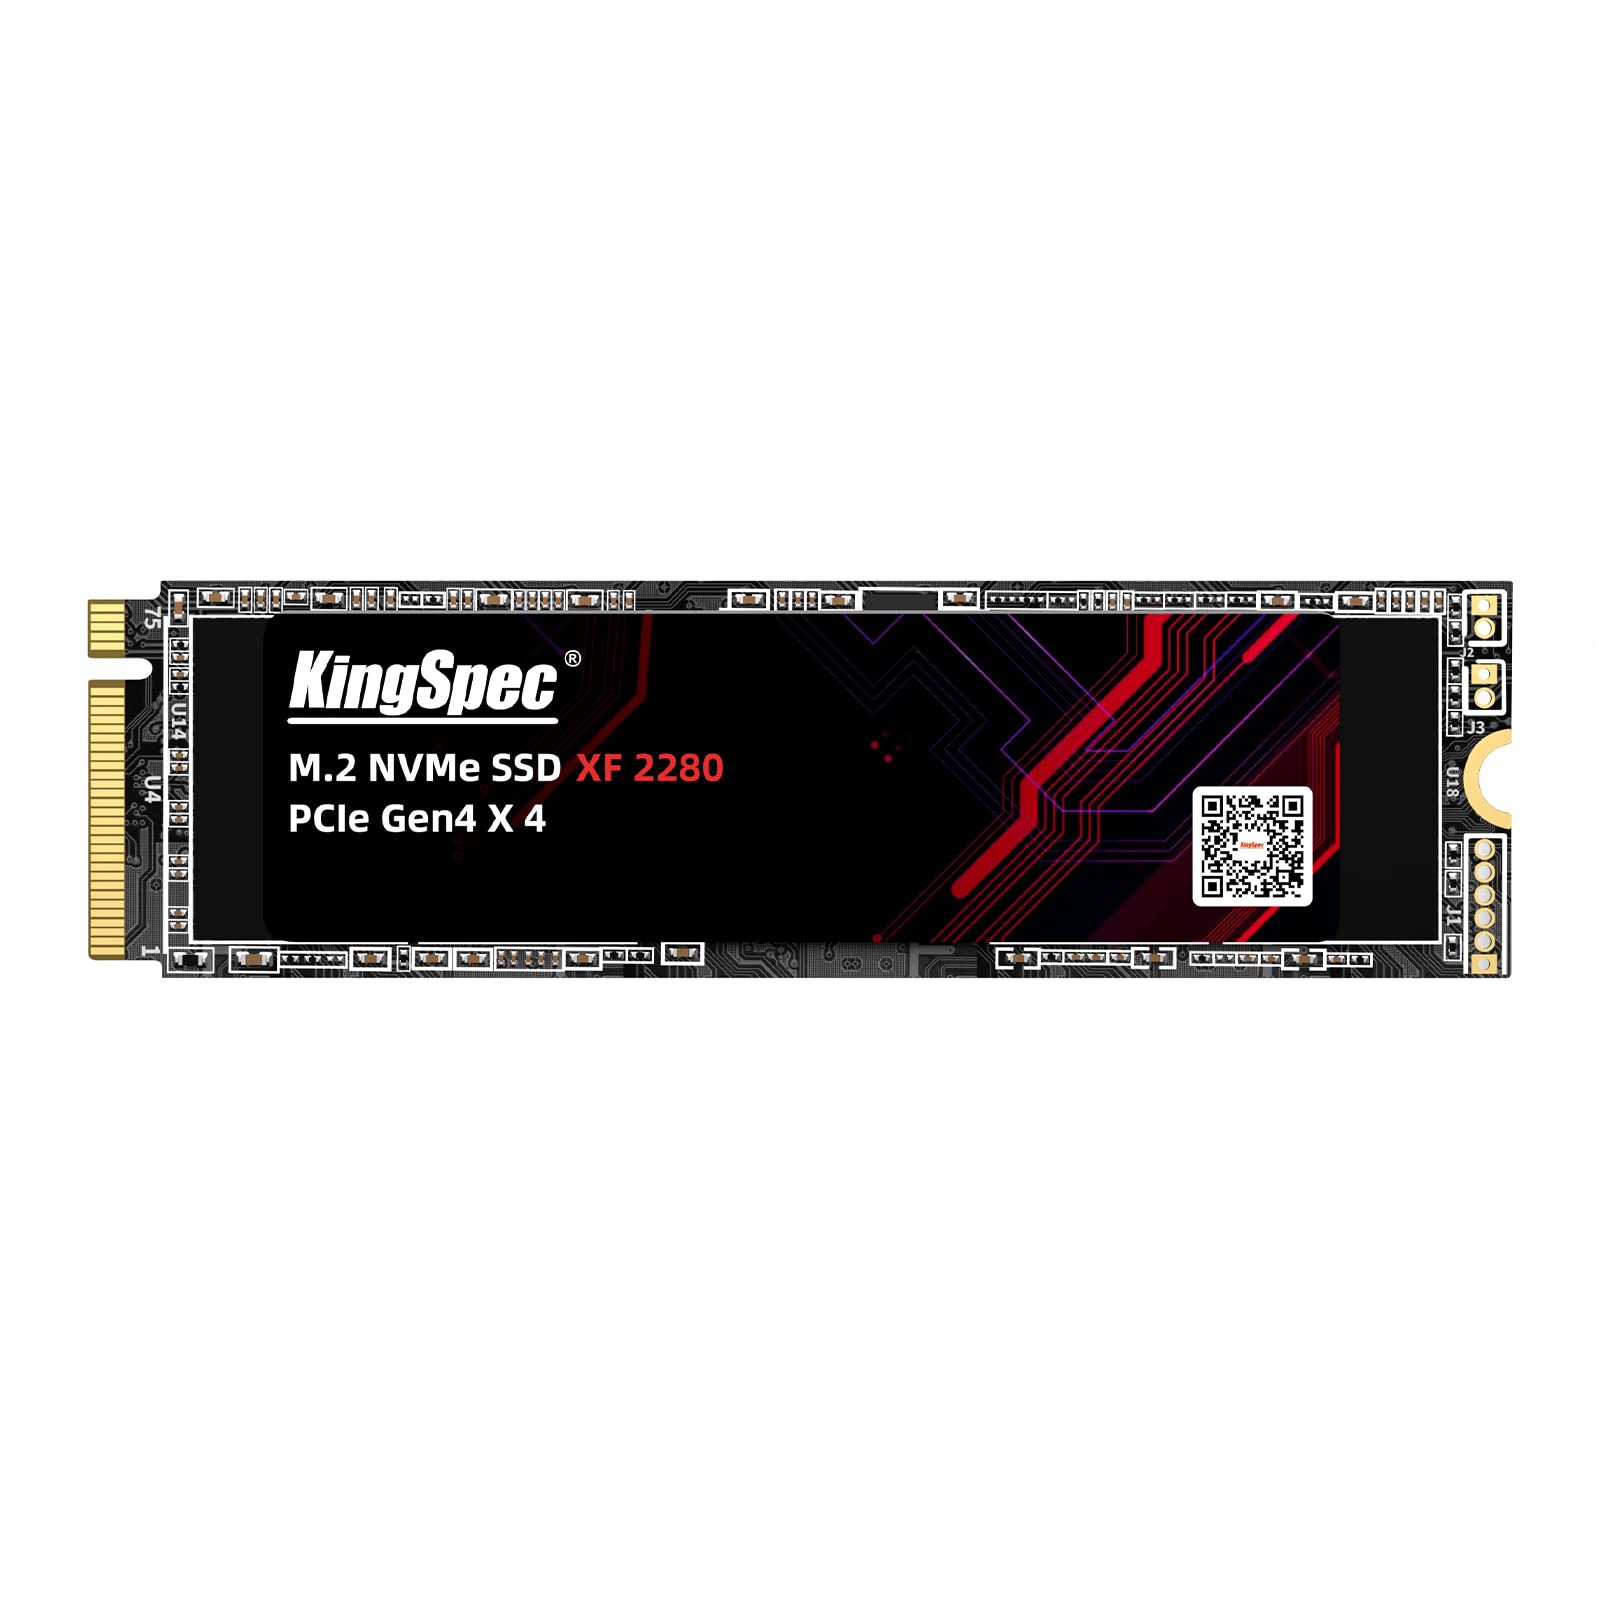 KingSpec 512GB PS5 SSD, M.2 NVMe Gen 4x4 SSD - Up to 4800 MB/s Sequential Read, Internal PCIe 2280 SSD with 3D NAND TLC Flash, Compatible with Desktop/Laptop/Playstation 5 Consoles